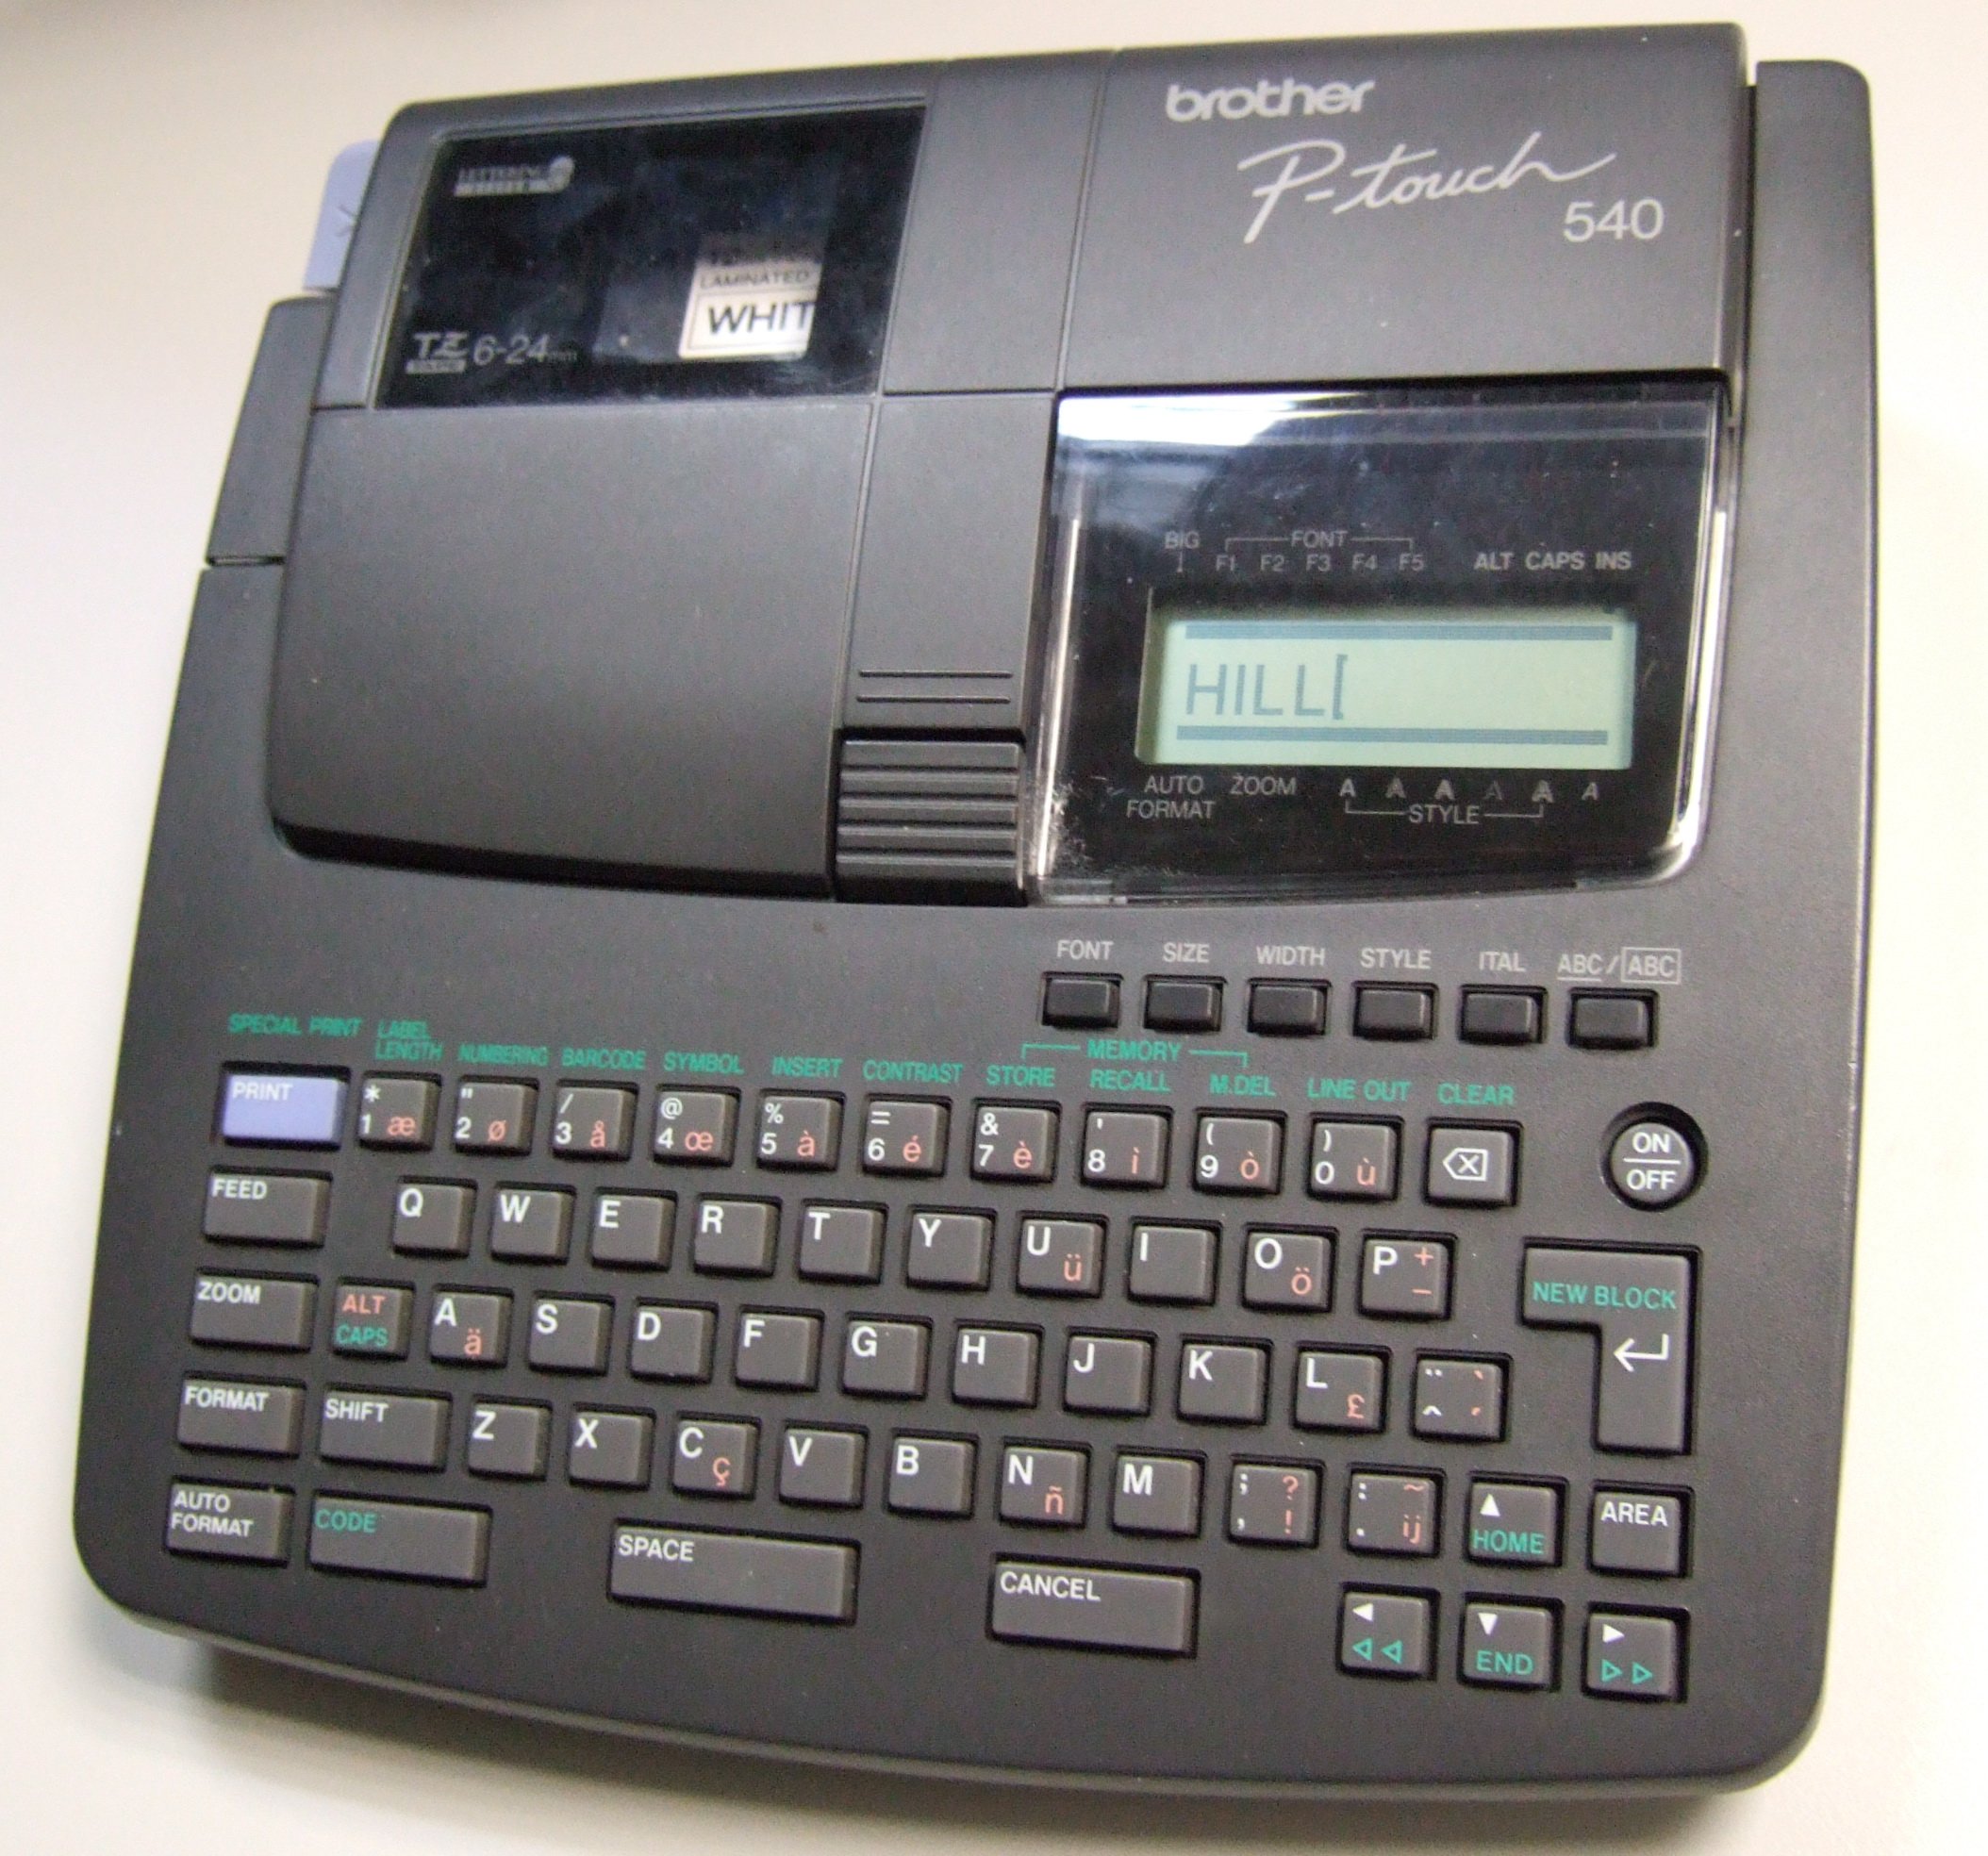 A Brother P touch 540 label printer